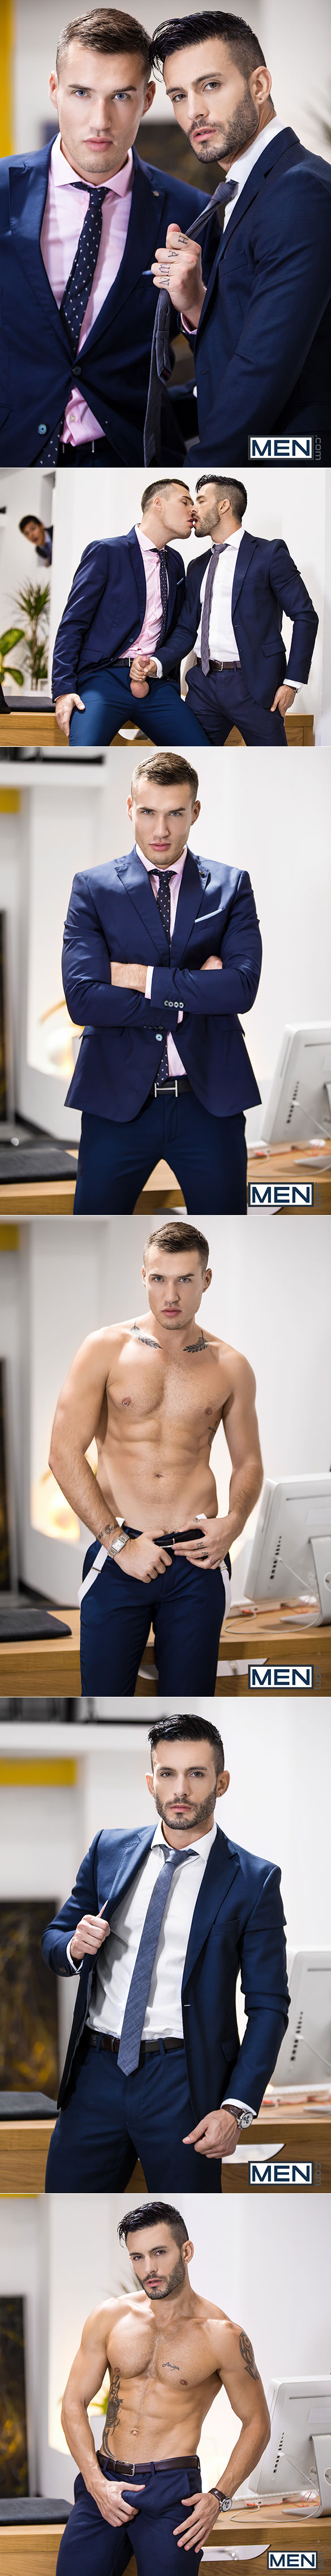 Men.com: Theo Ford fucks Andy Star in "Consulting Cock, Part 3"